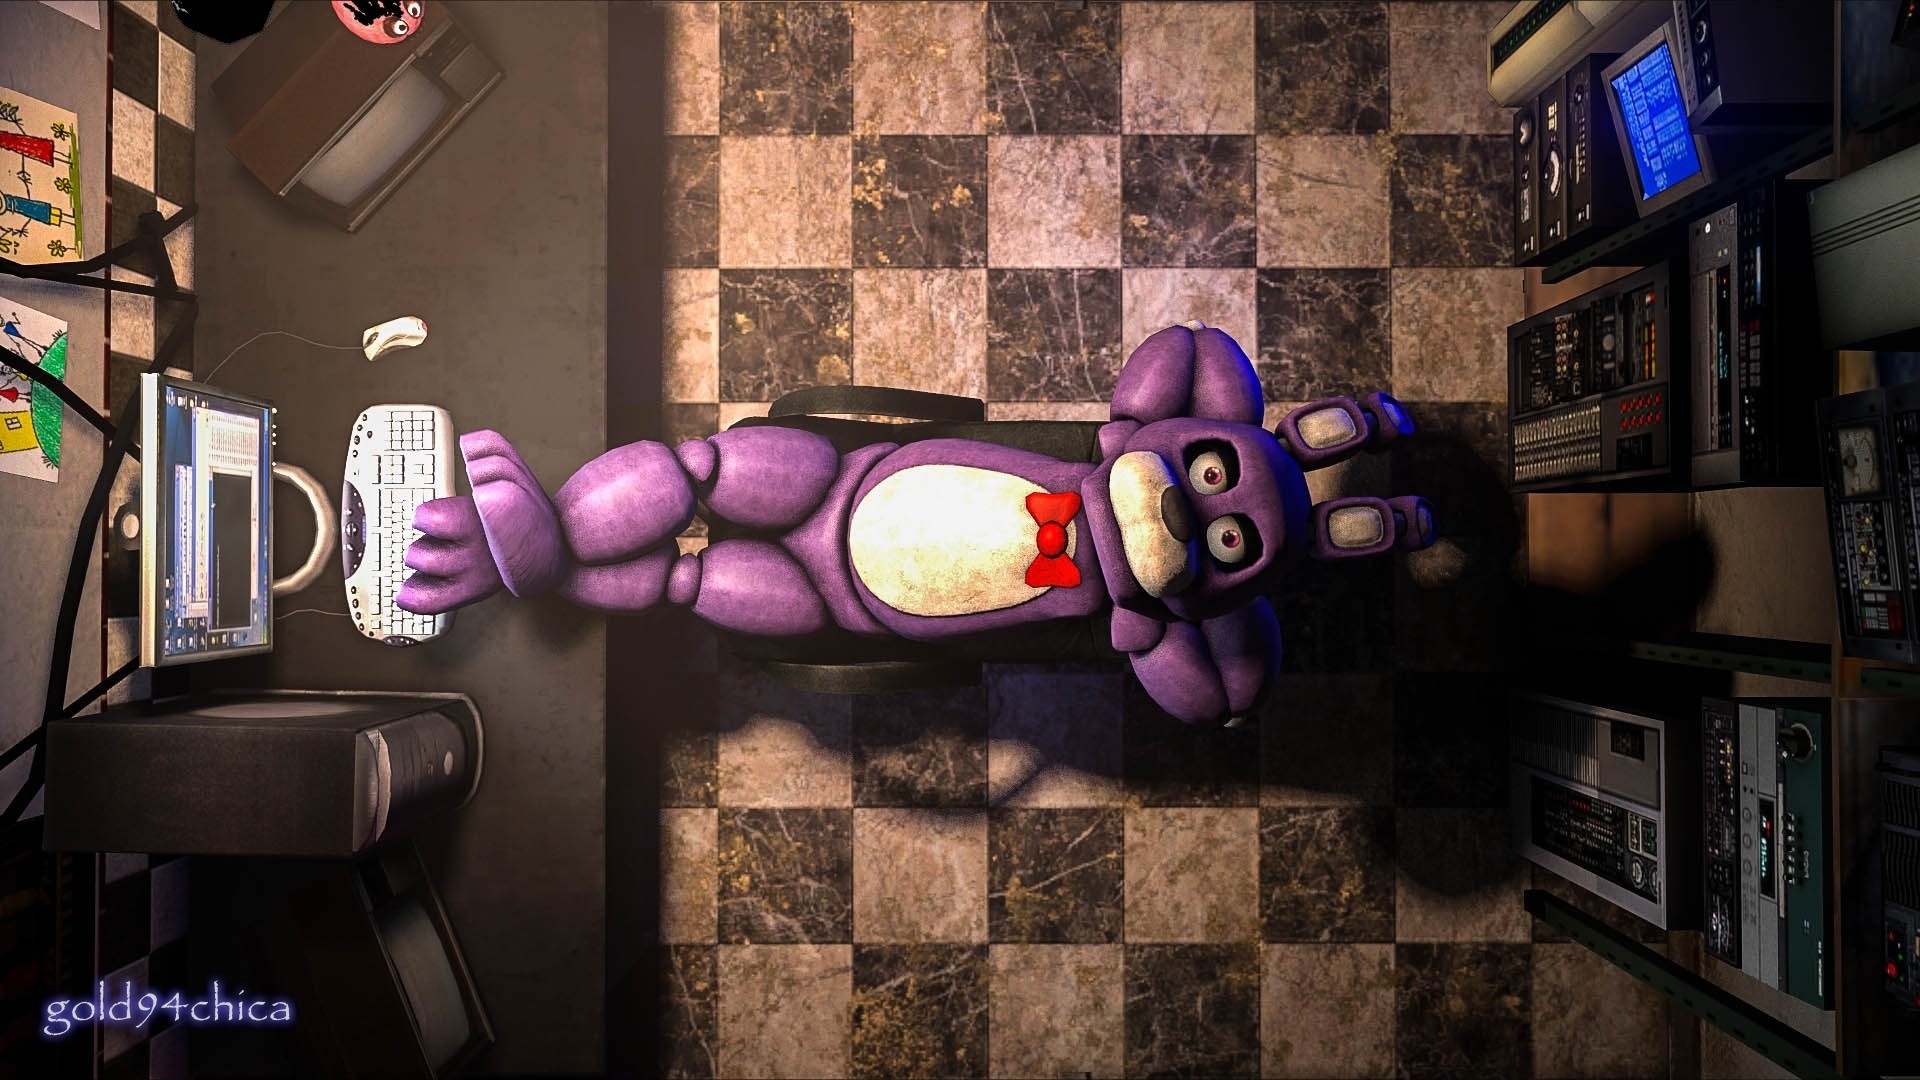 (Bonnie SFM Wallpaper) by gold94chica on .